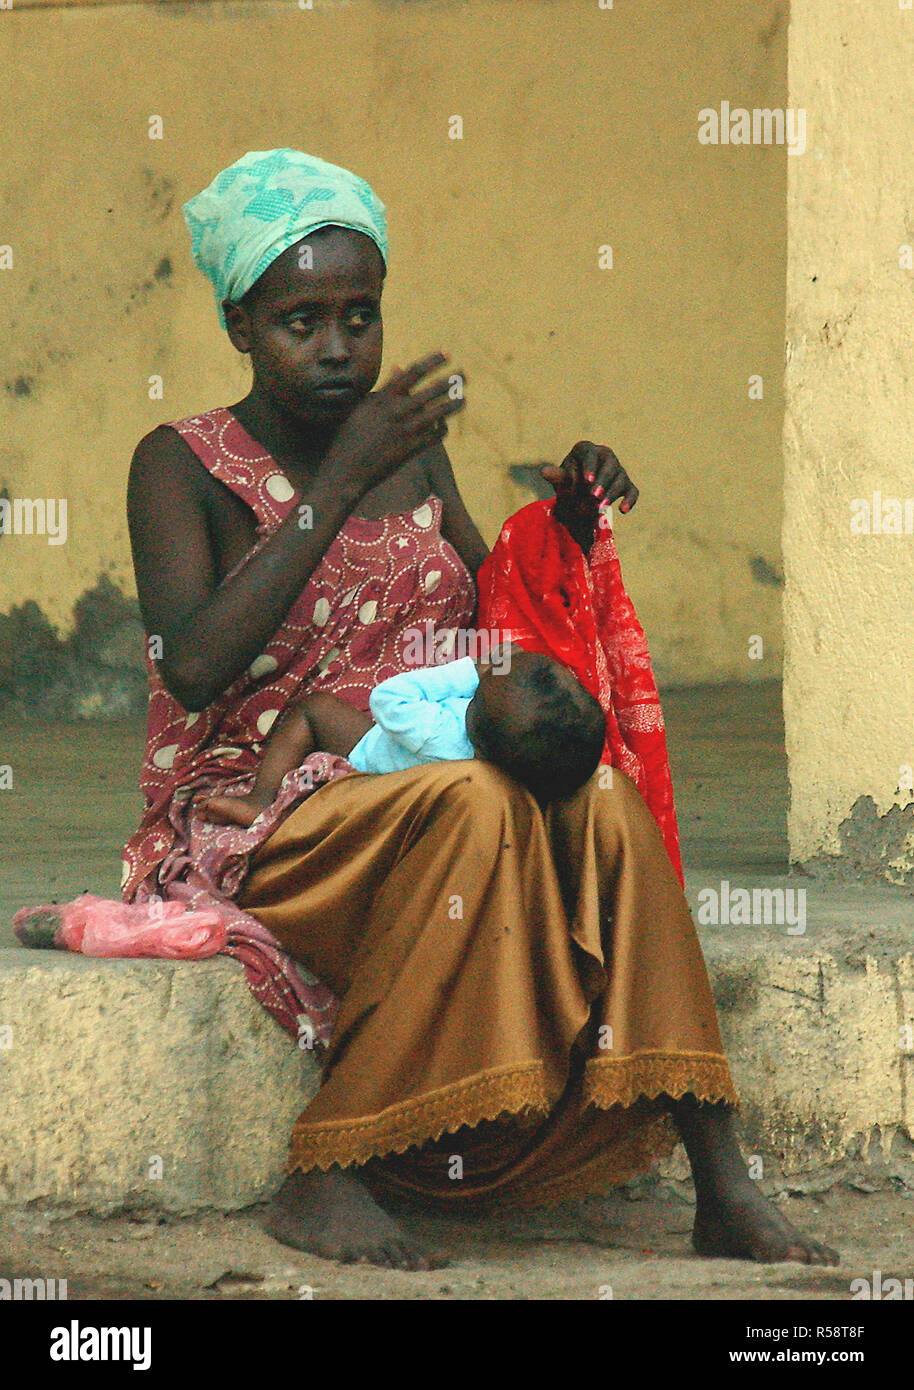 2003 -  On the streets in Djibouti, Africa, a Djiboutian woman cares for her baby during Operation ENDURING FREEDOM. Stock Photo